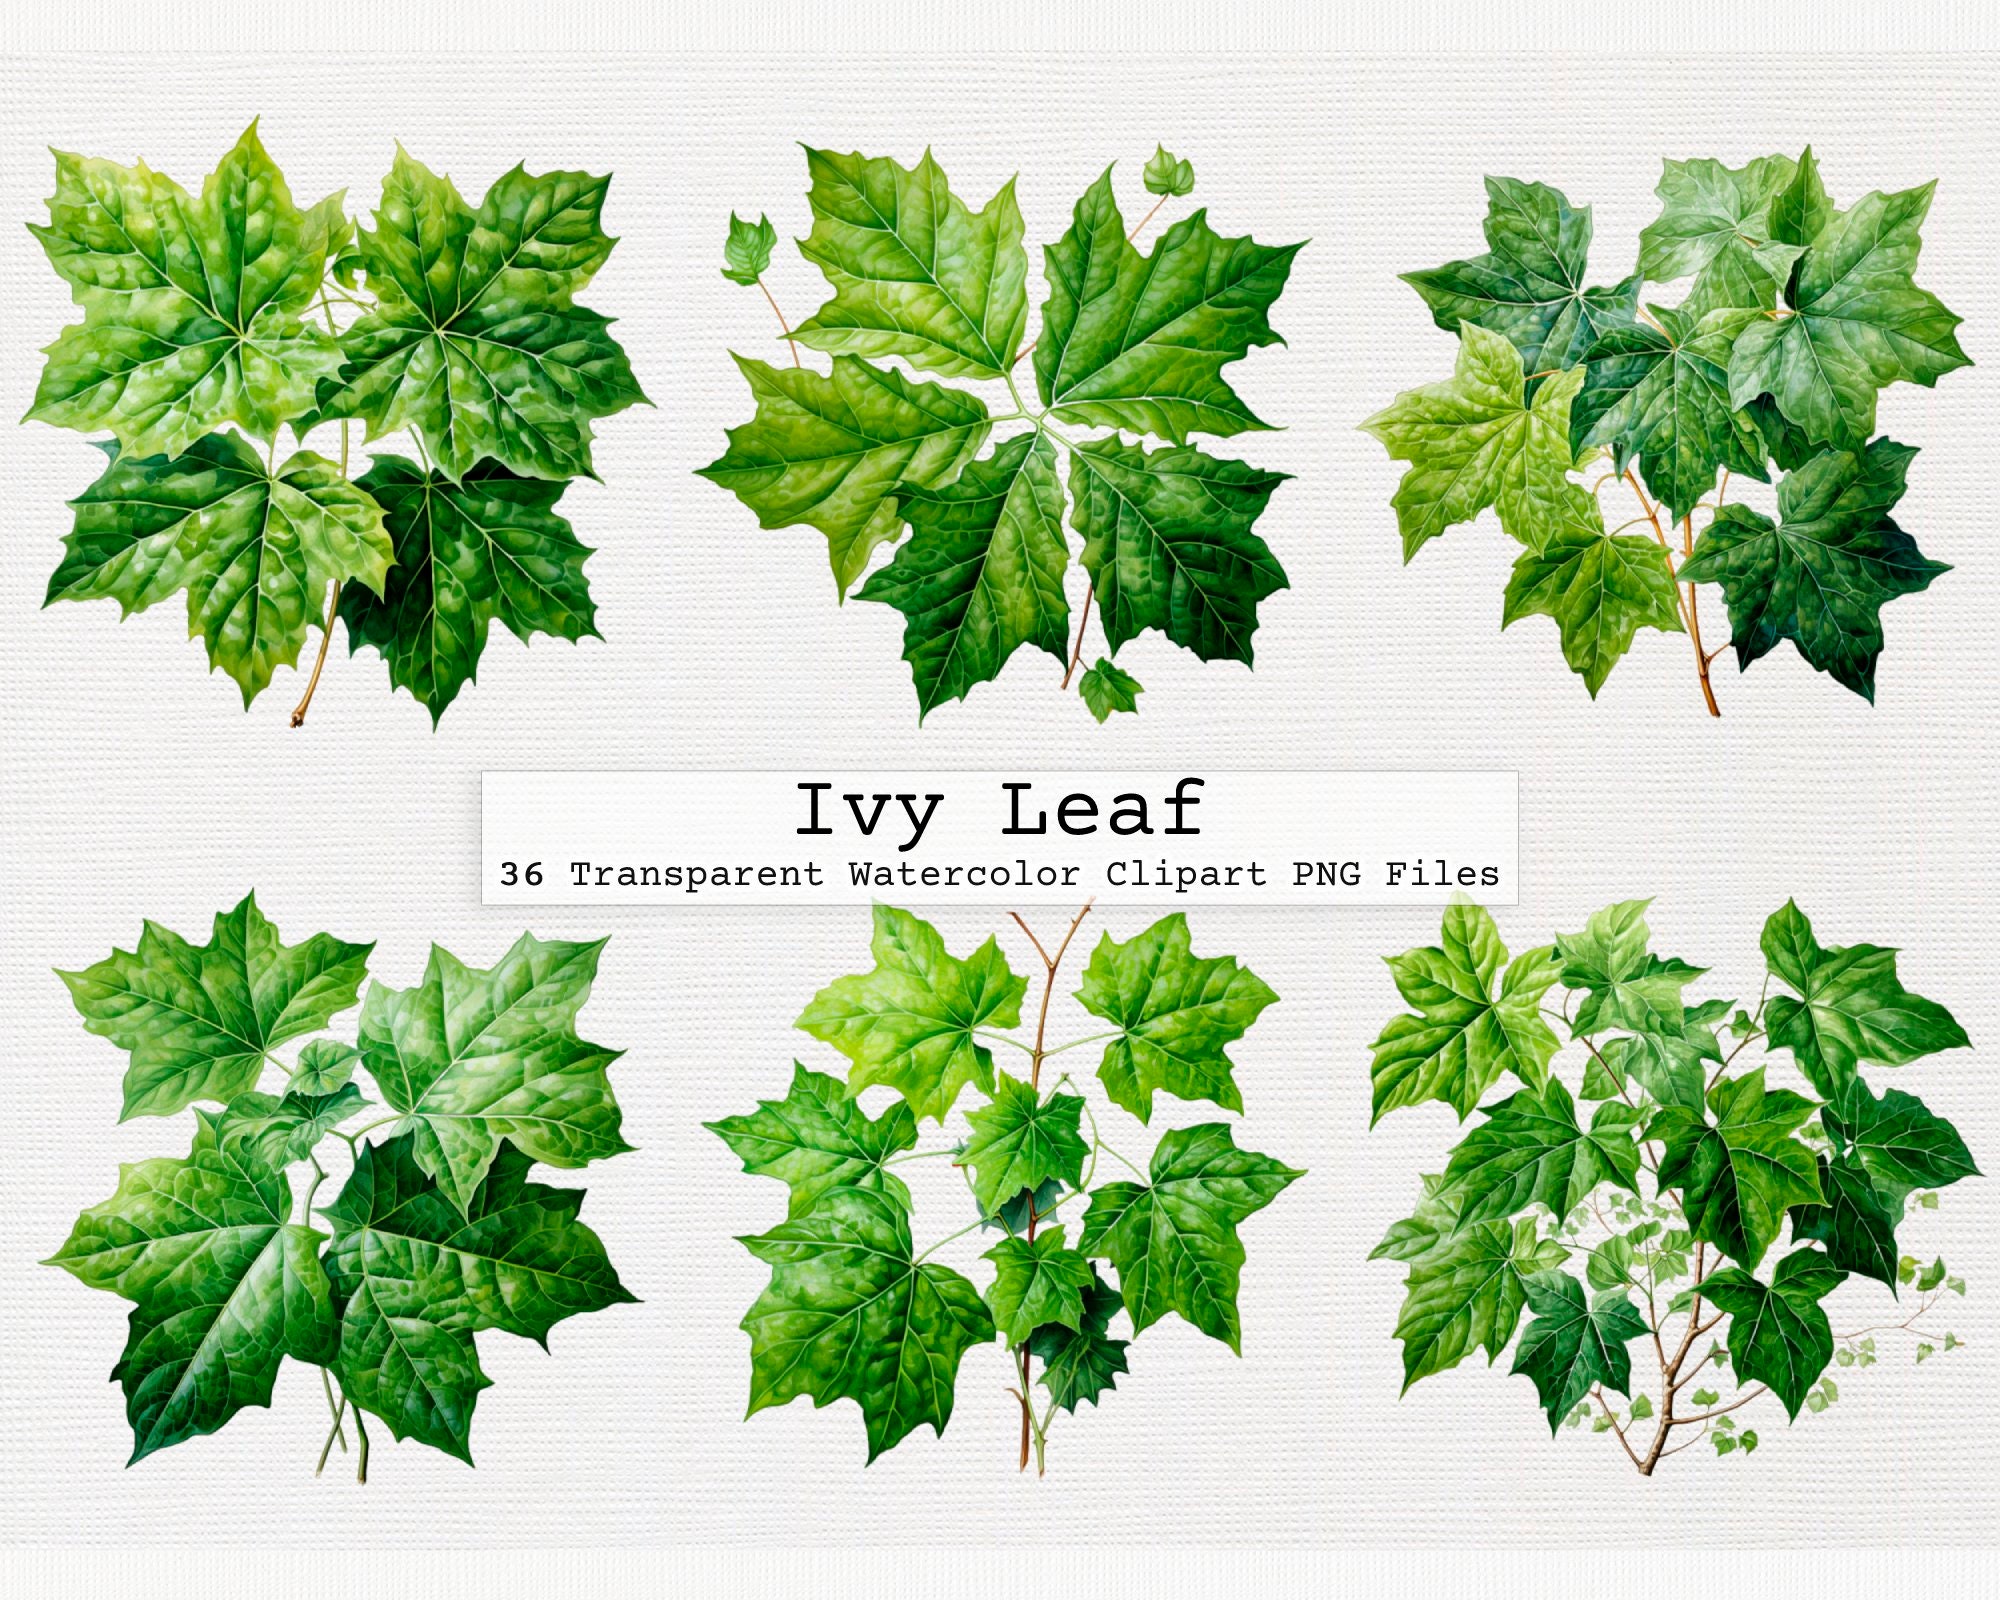 Ivy Leaves Clipart Transparent PNG Hd, Ivy Leaves Free Illustration, Ivy  Clipart, Ivy Leaves, Fresh Literary Green Leaves PNG Image For Free Download